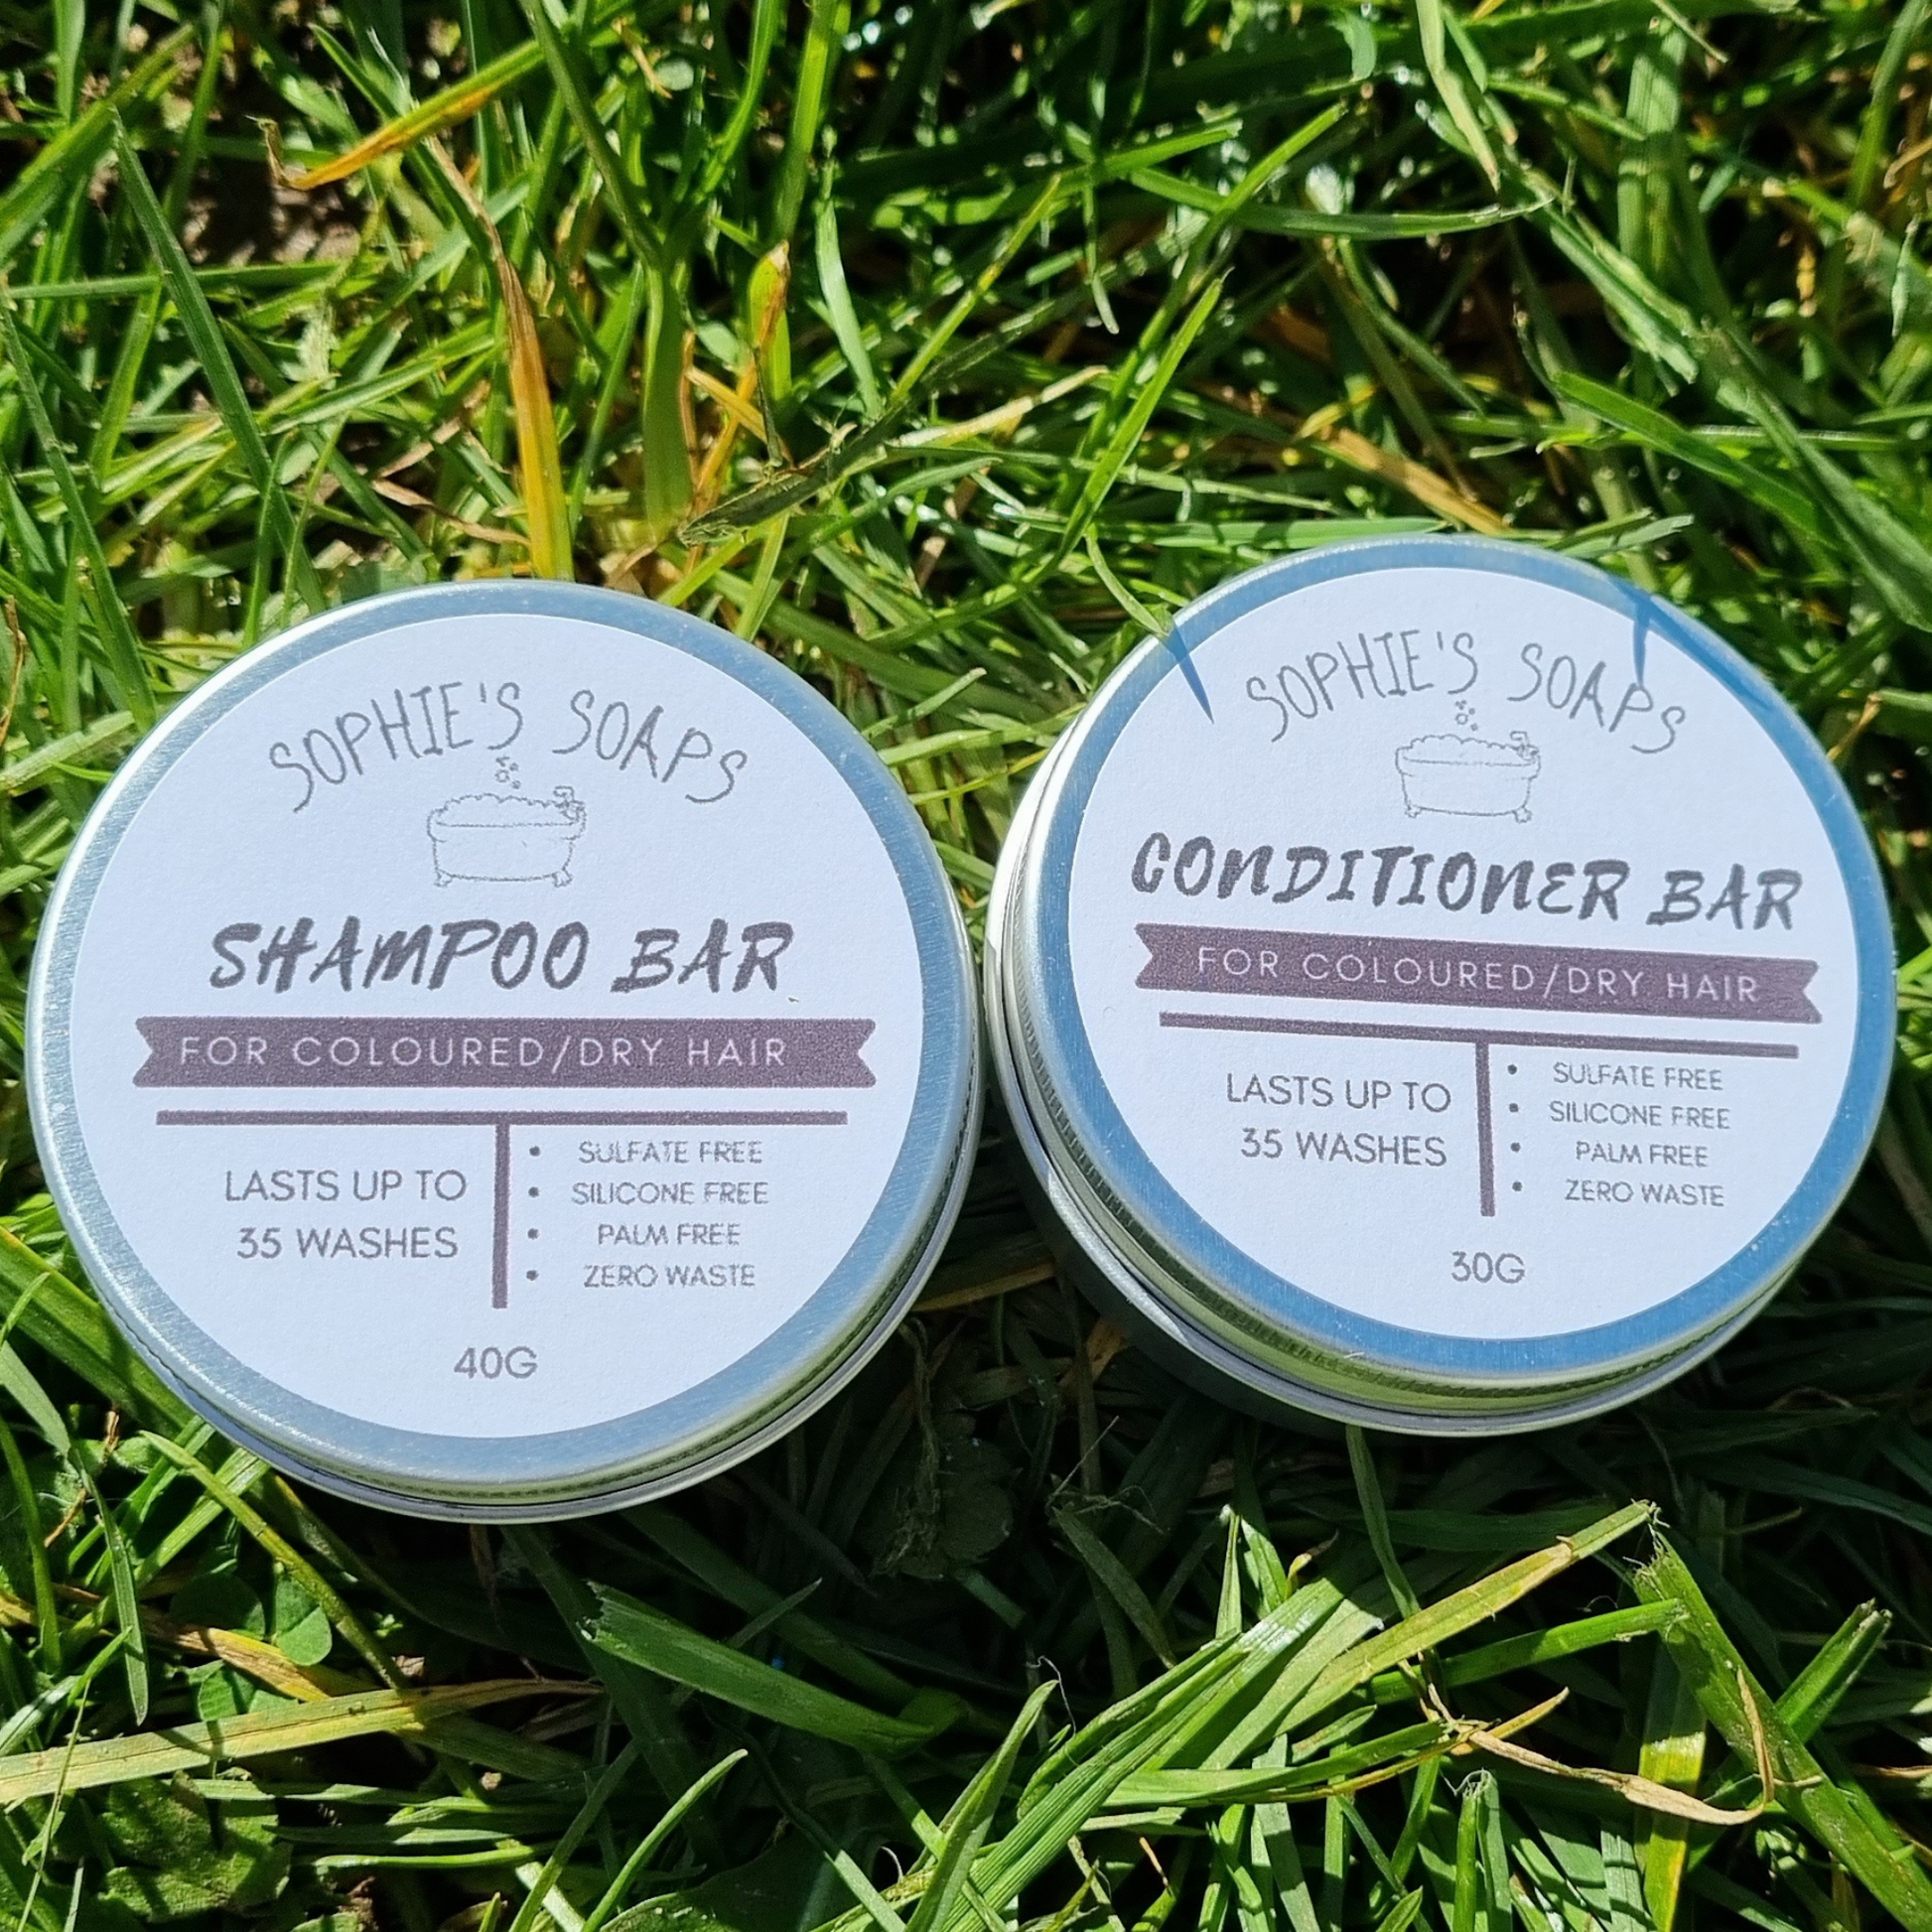 Coloured/Dry Hair Conditioner Bar - Sophie's Soaps